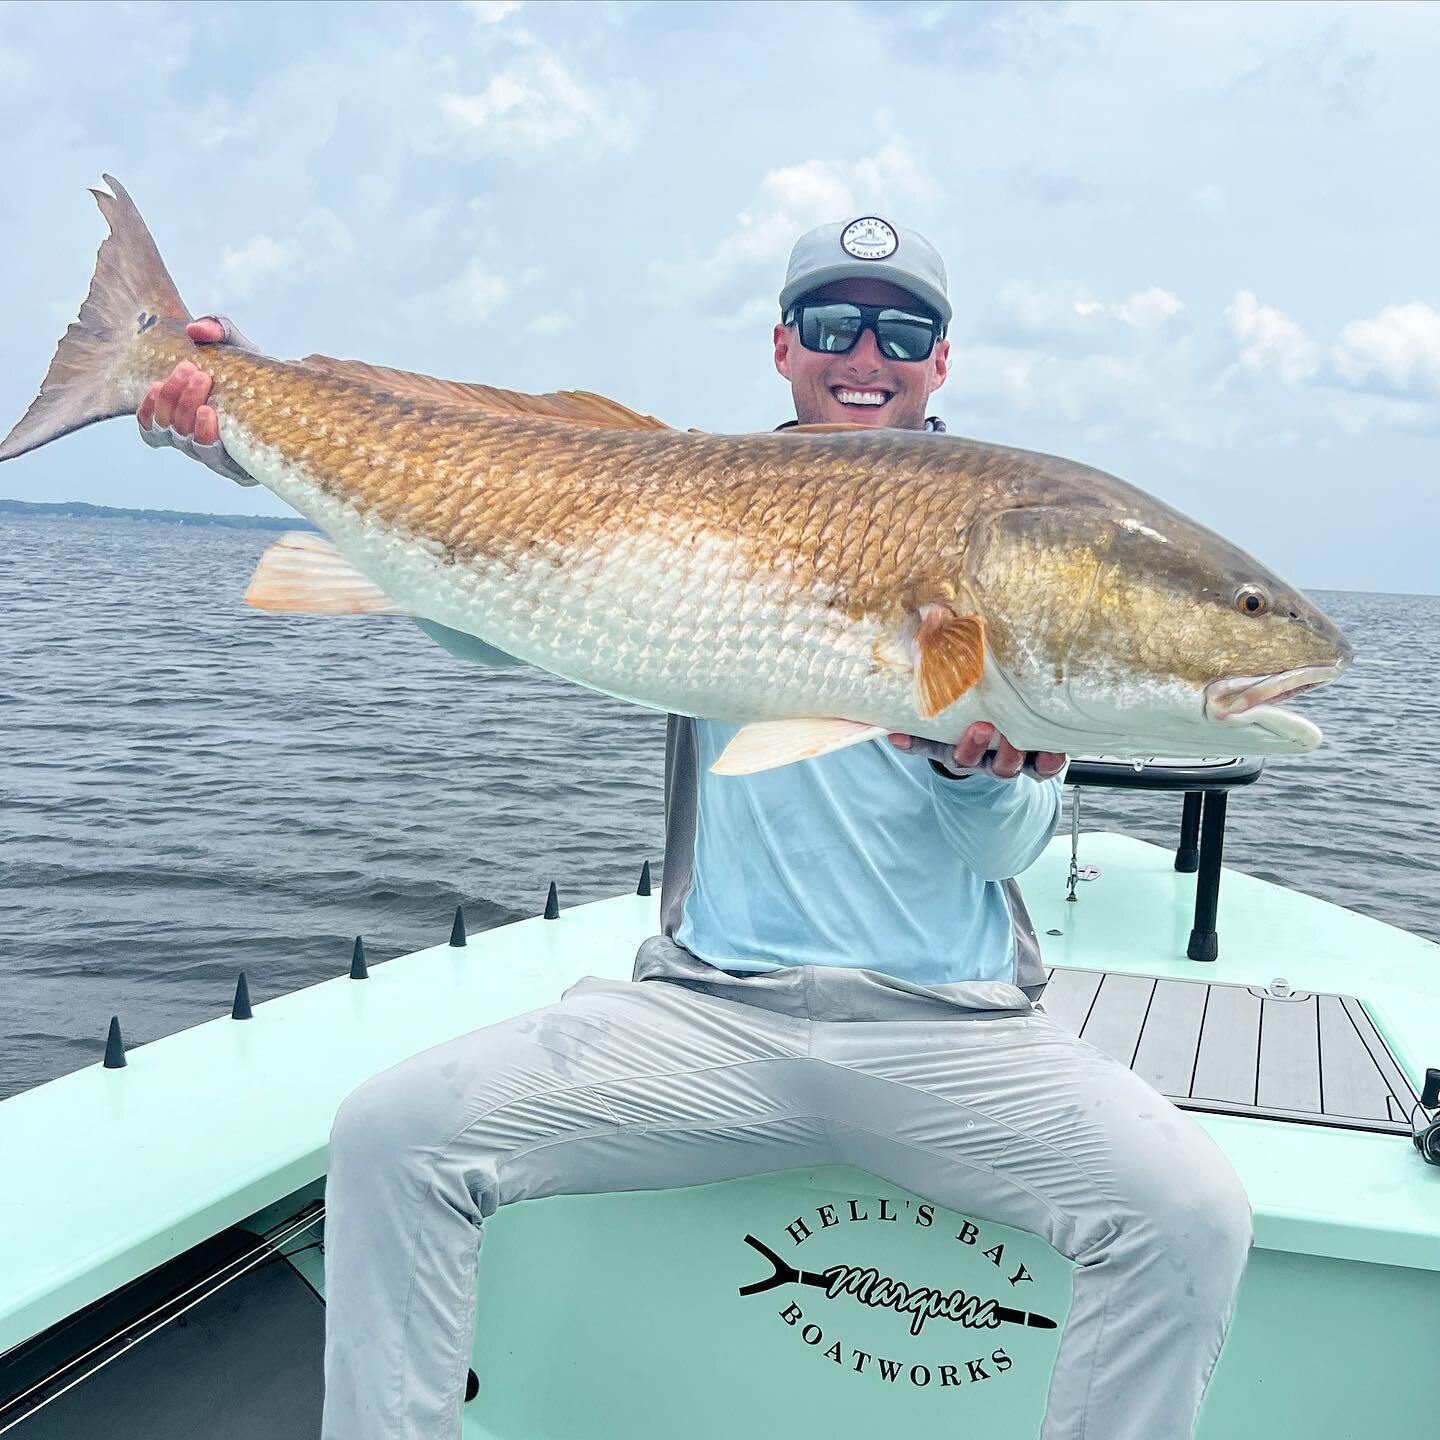 Jamie gave me a shot to catch one. So, I went for a trophy. Another great July fishing with Jamie. We spent a bunch of days together this month targeting redfish and trout. We had a great time doing it. I&rsquo;m looking forward to seeing you in Sept